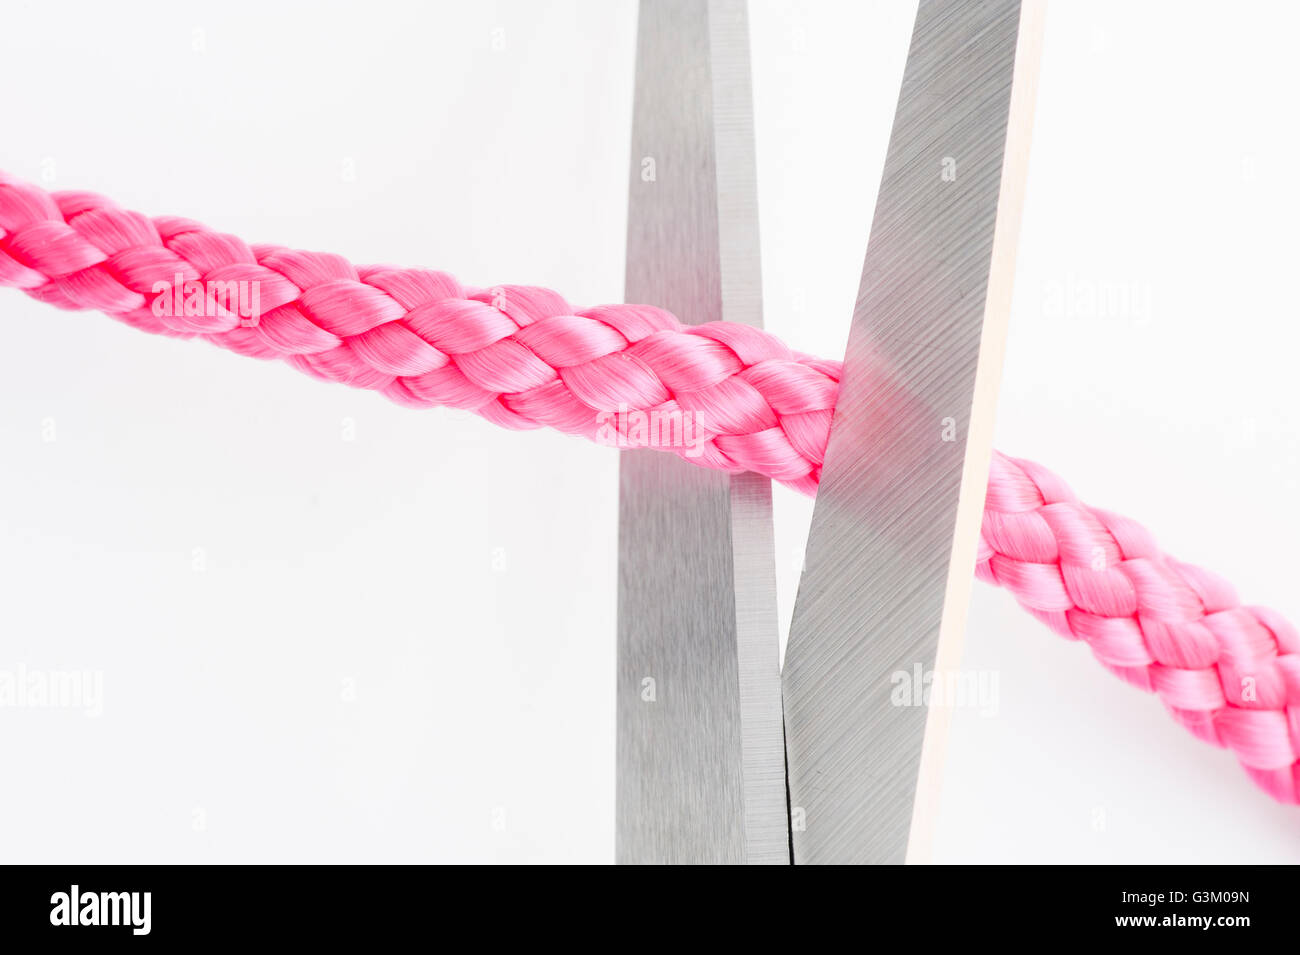 Scissors cutting a pink string Stock Photo